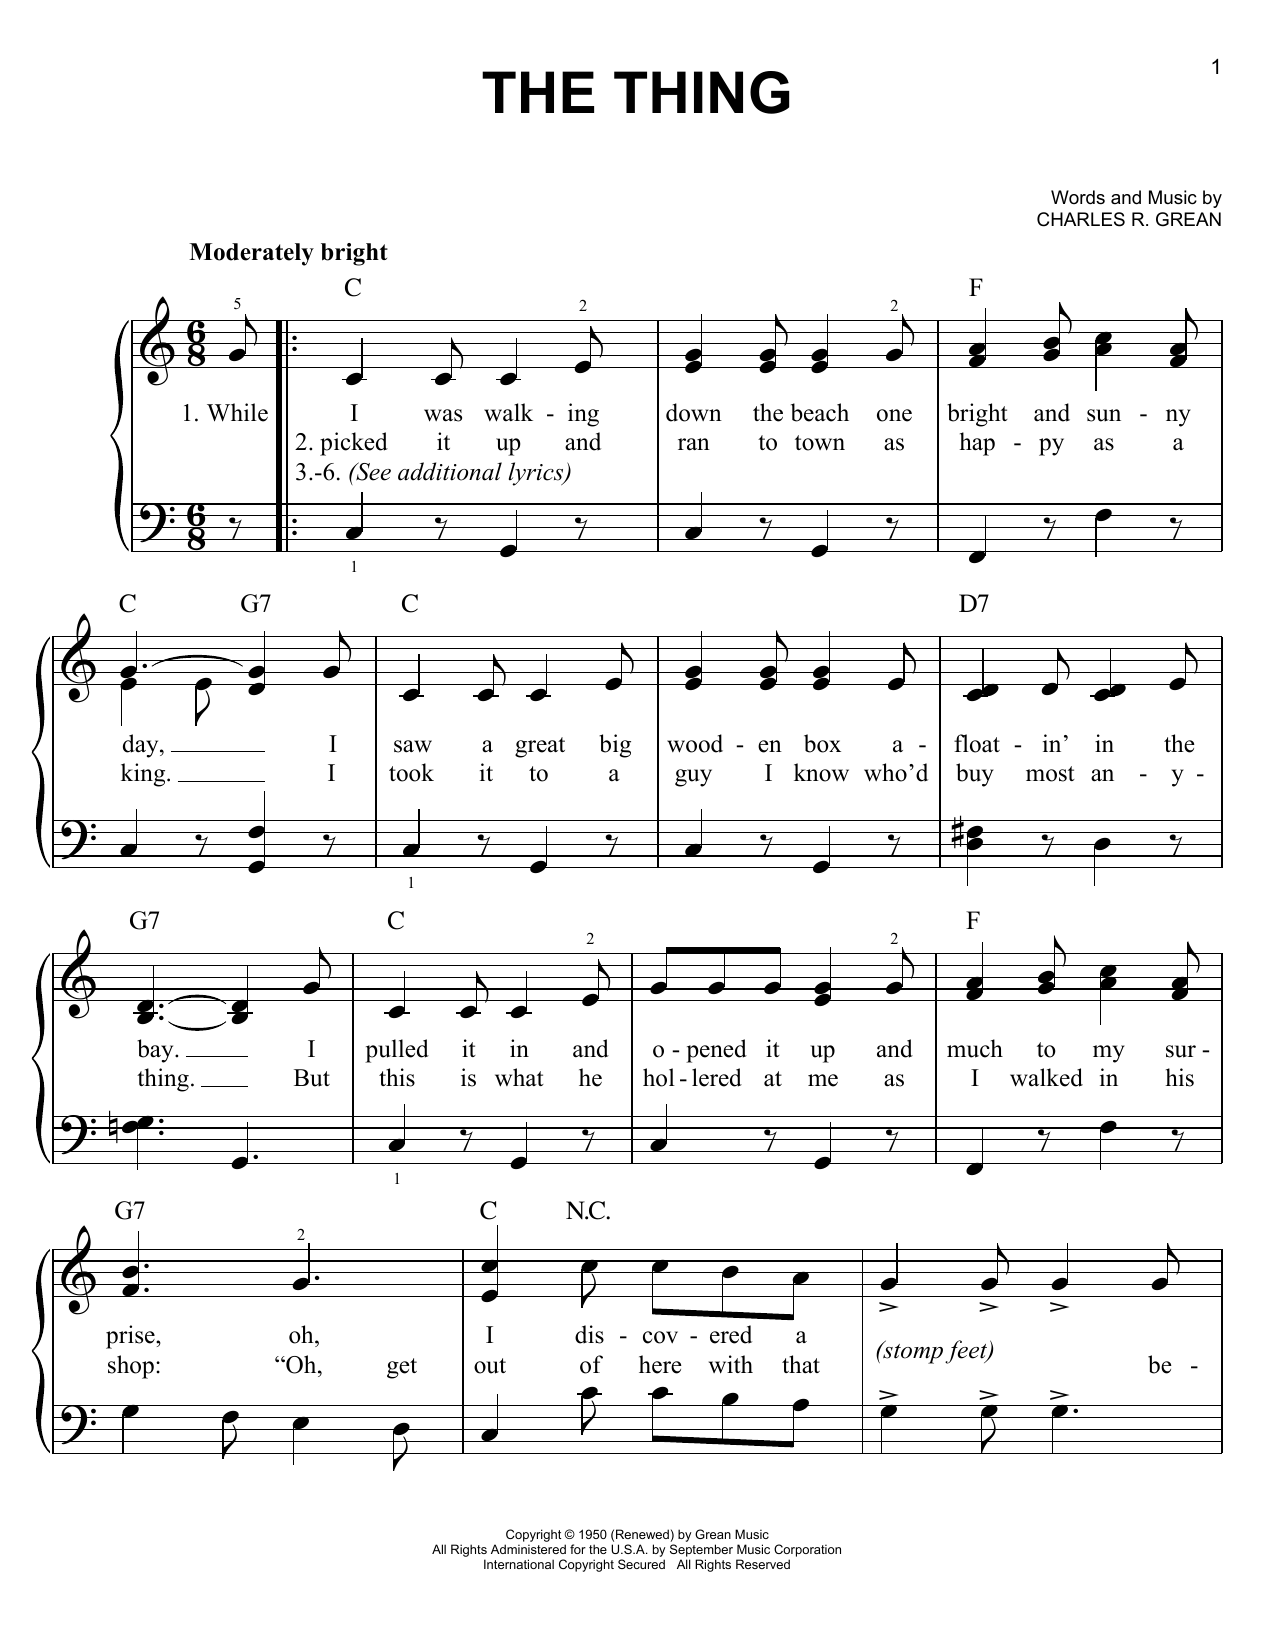 Download Charles R. Grean The Thing Sheet Music